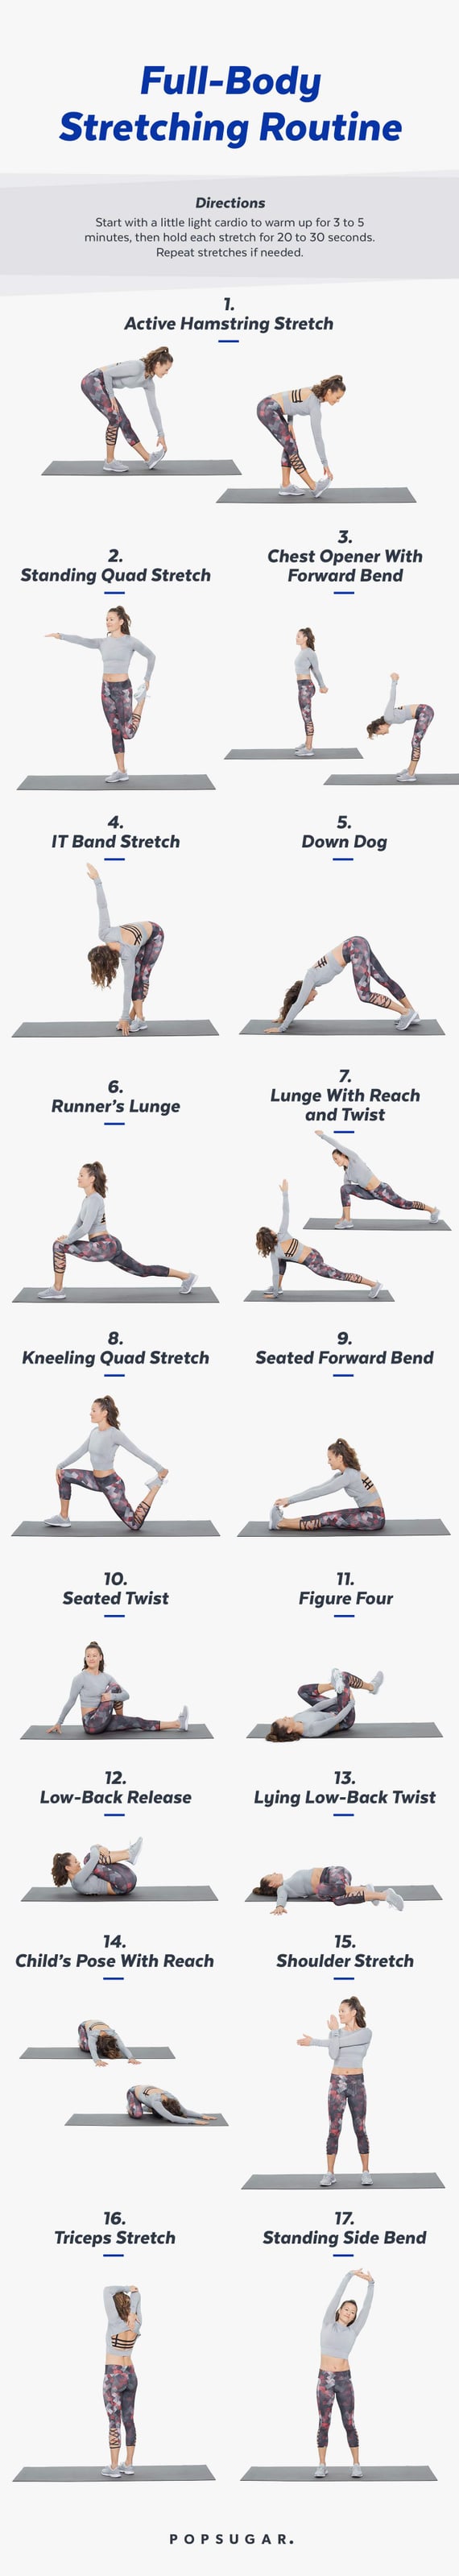 10 Minute Full Body Stretch Routine (with Printable PDF)